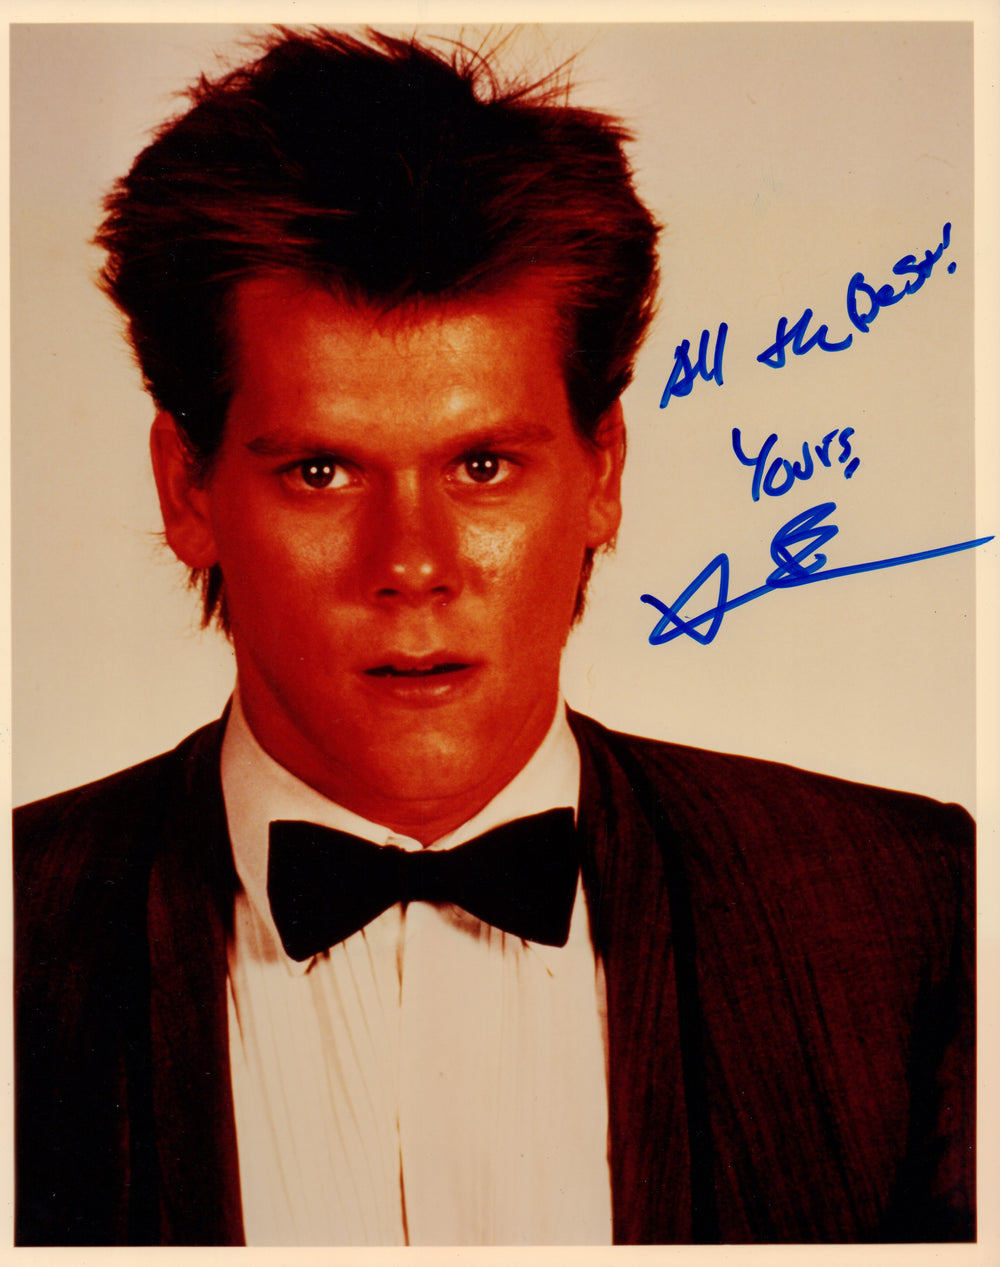 Kevin Bacon as Ren McCormack from Footloose Signed 8x10 Photo